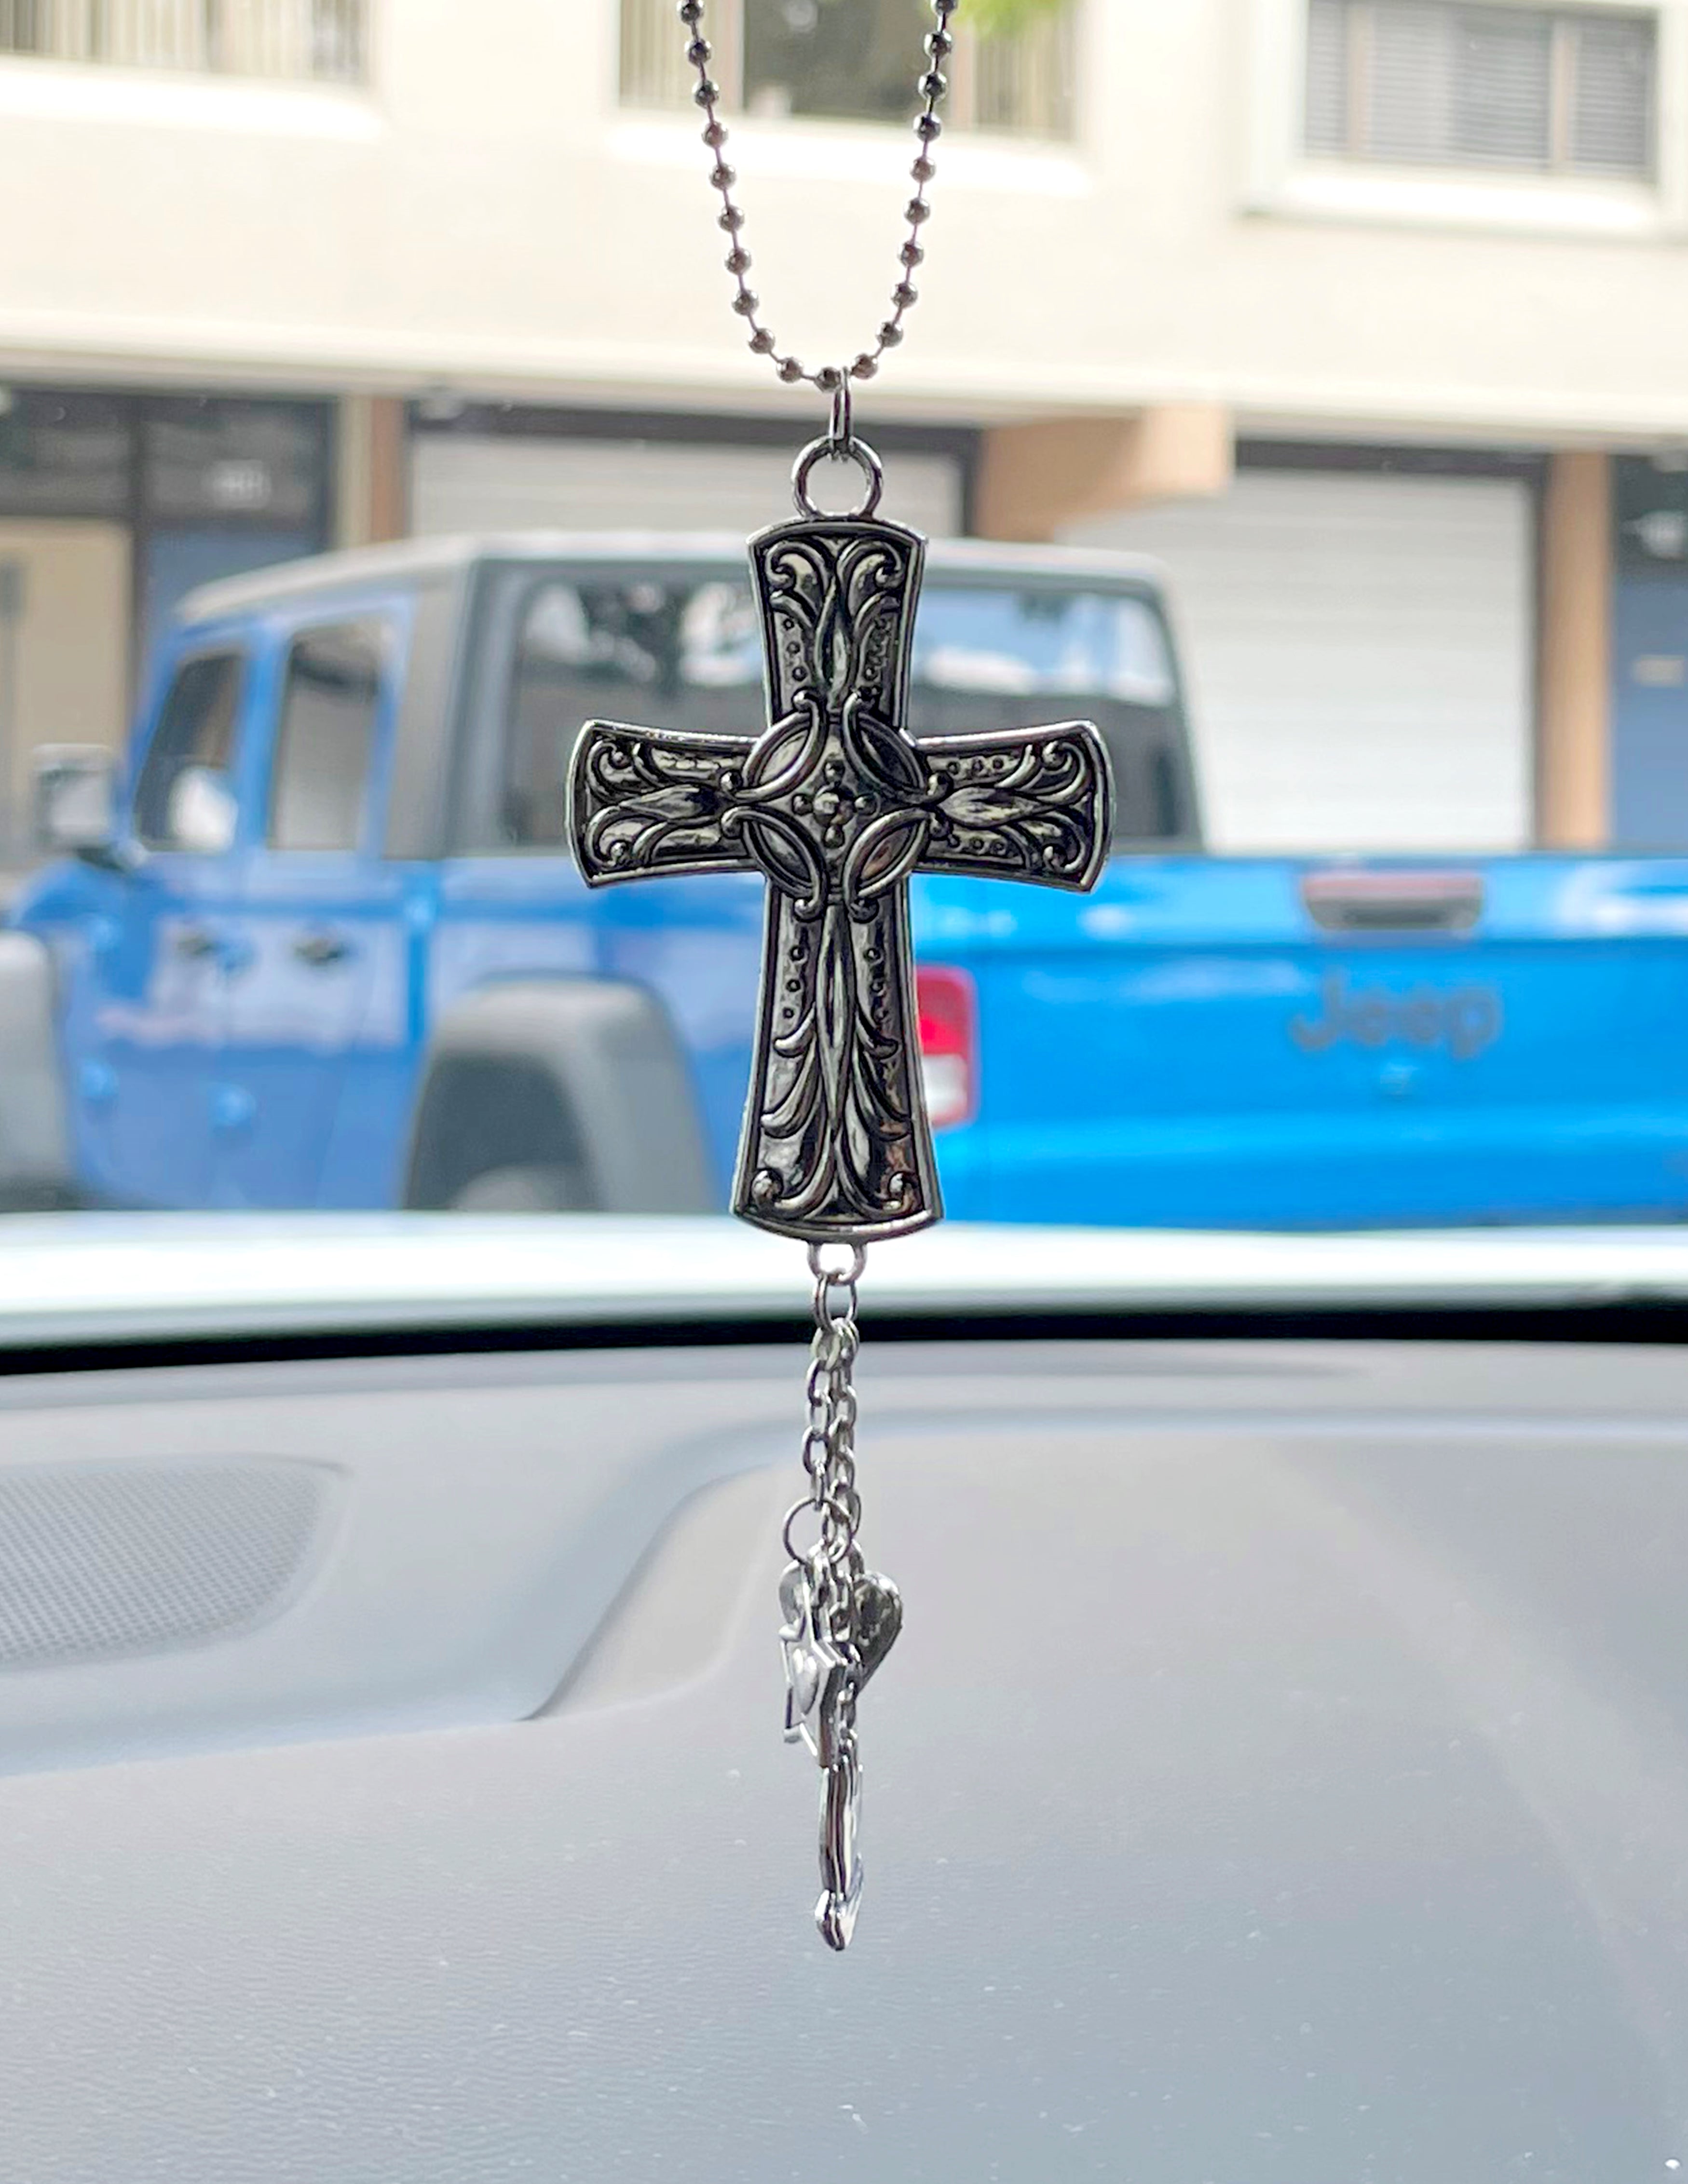 Hanging metallic cross special accessory to accompany you in your car